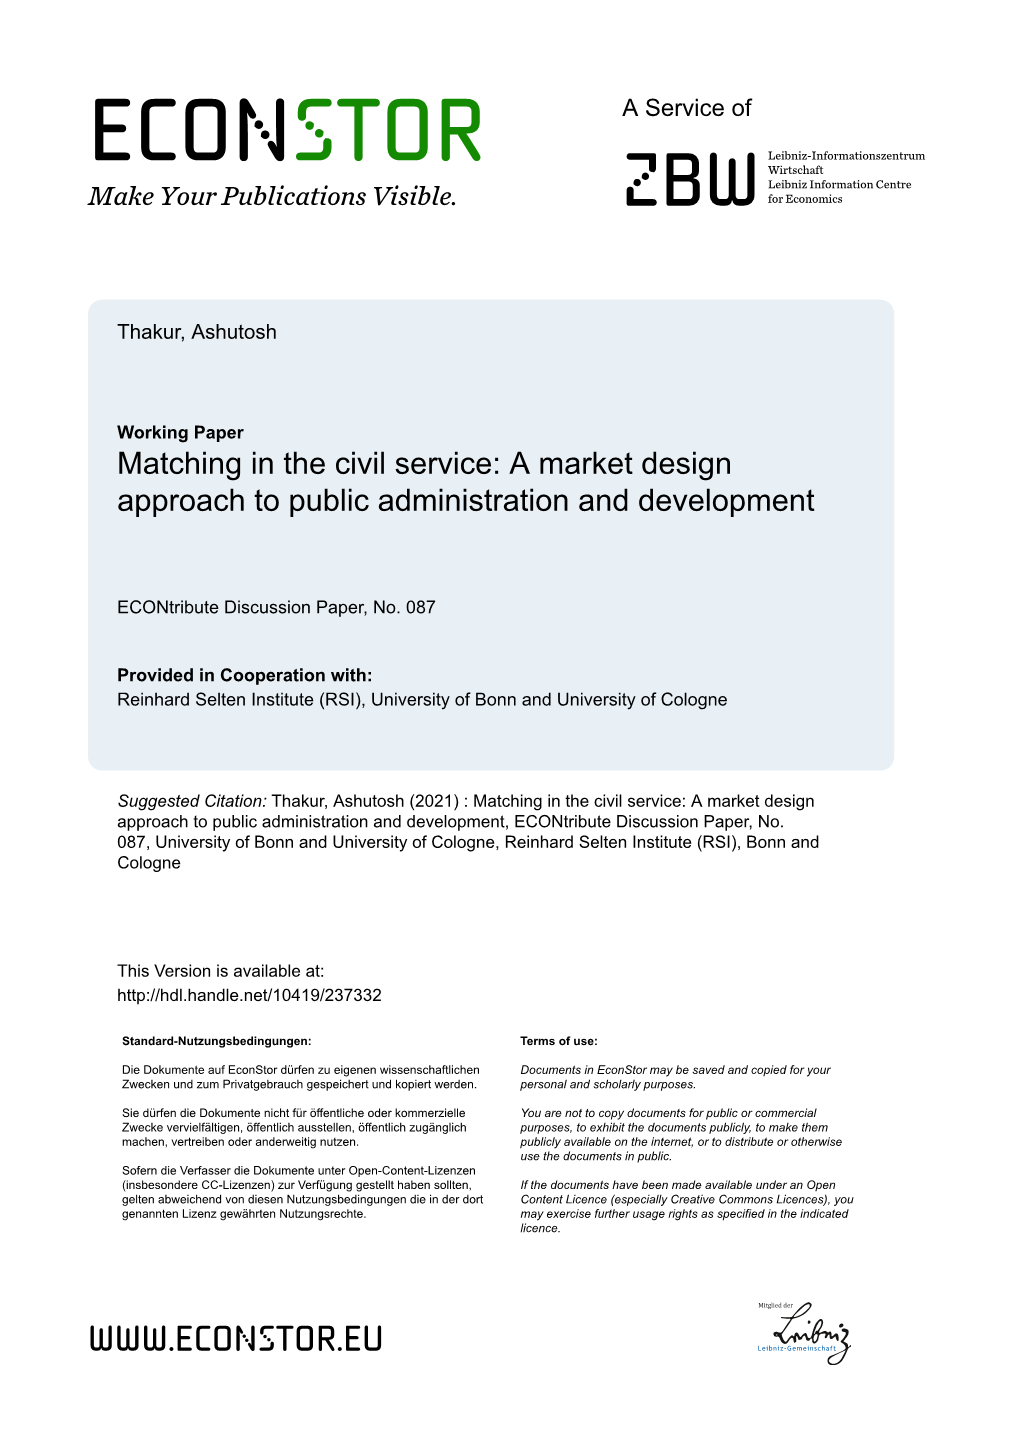 Matching in the Civil Service: a Market Design Approach to Public Administration and Development